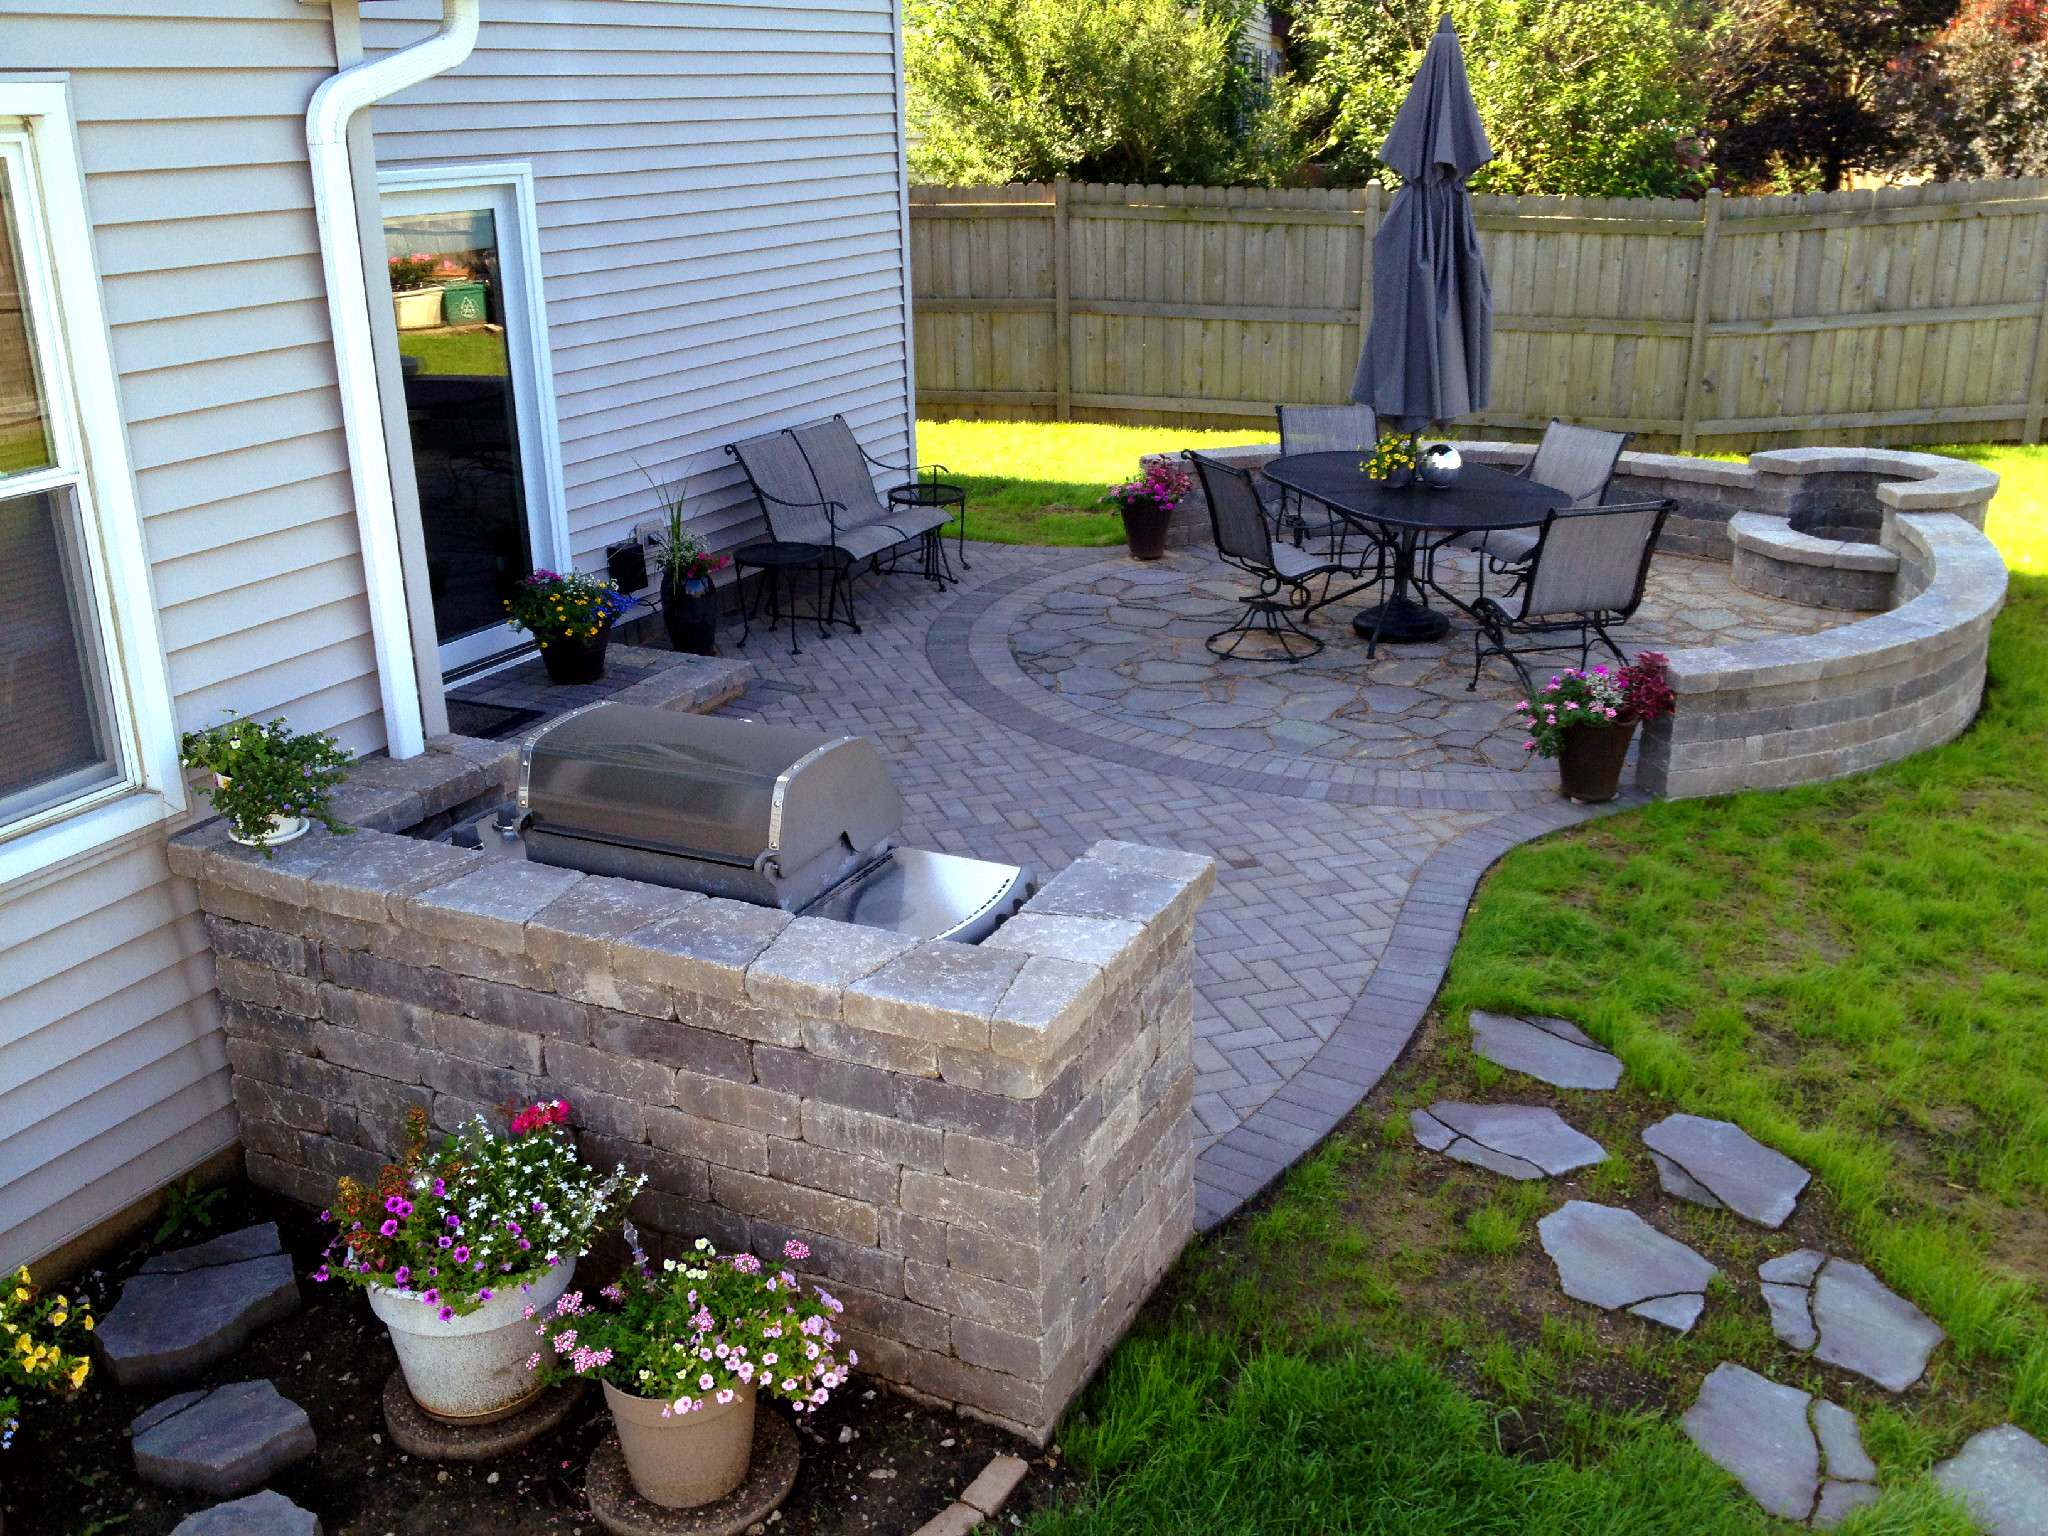 Brick Patio With A Fire Pit, Patio Block Fire Pit Ideas